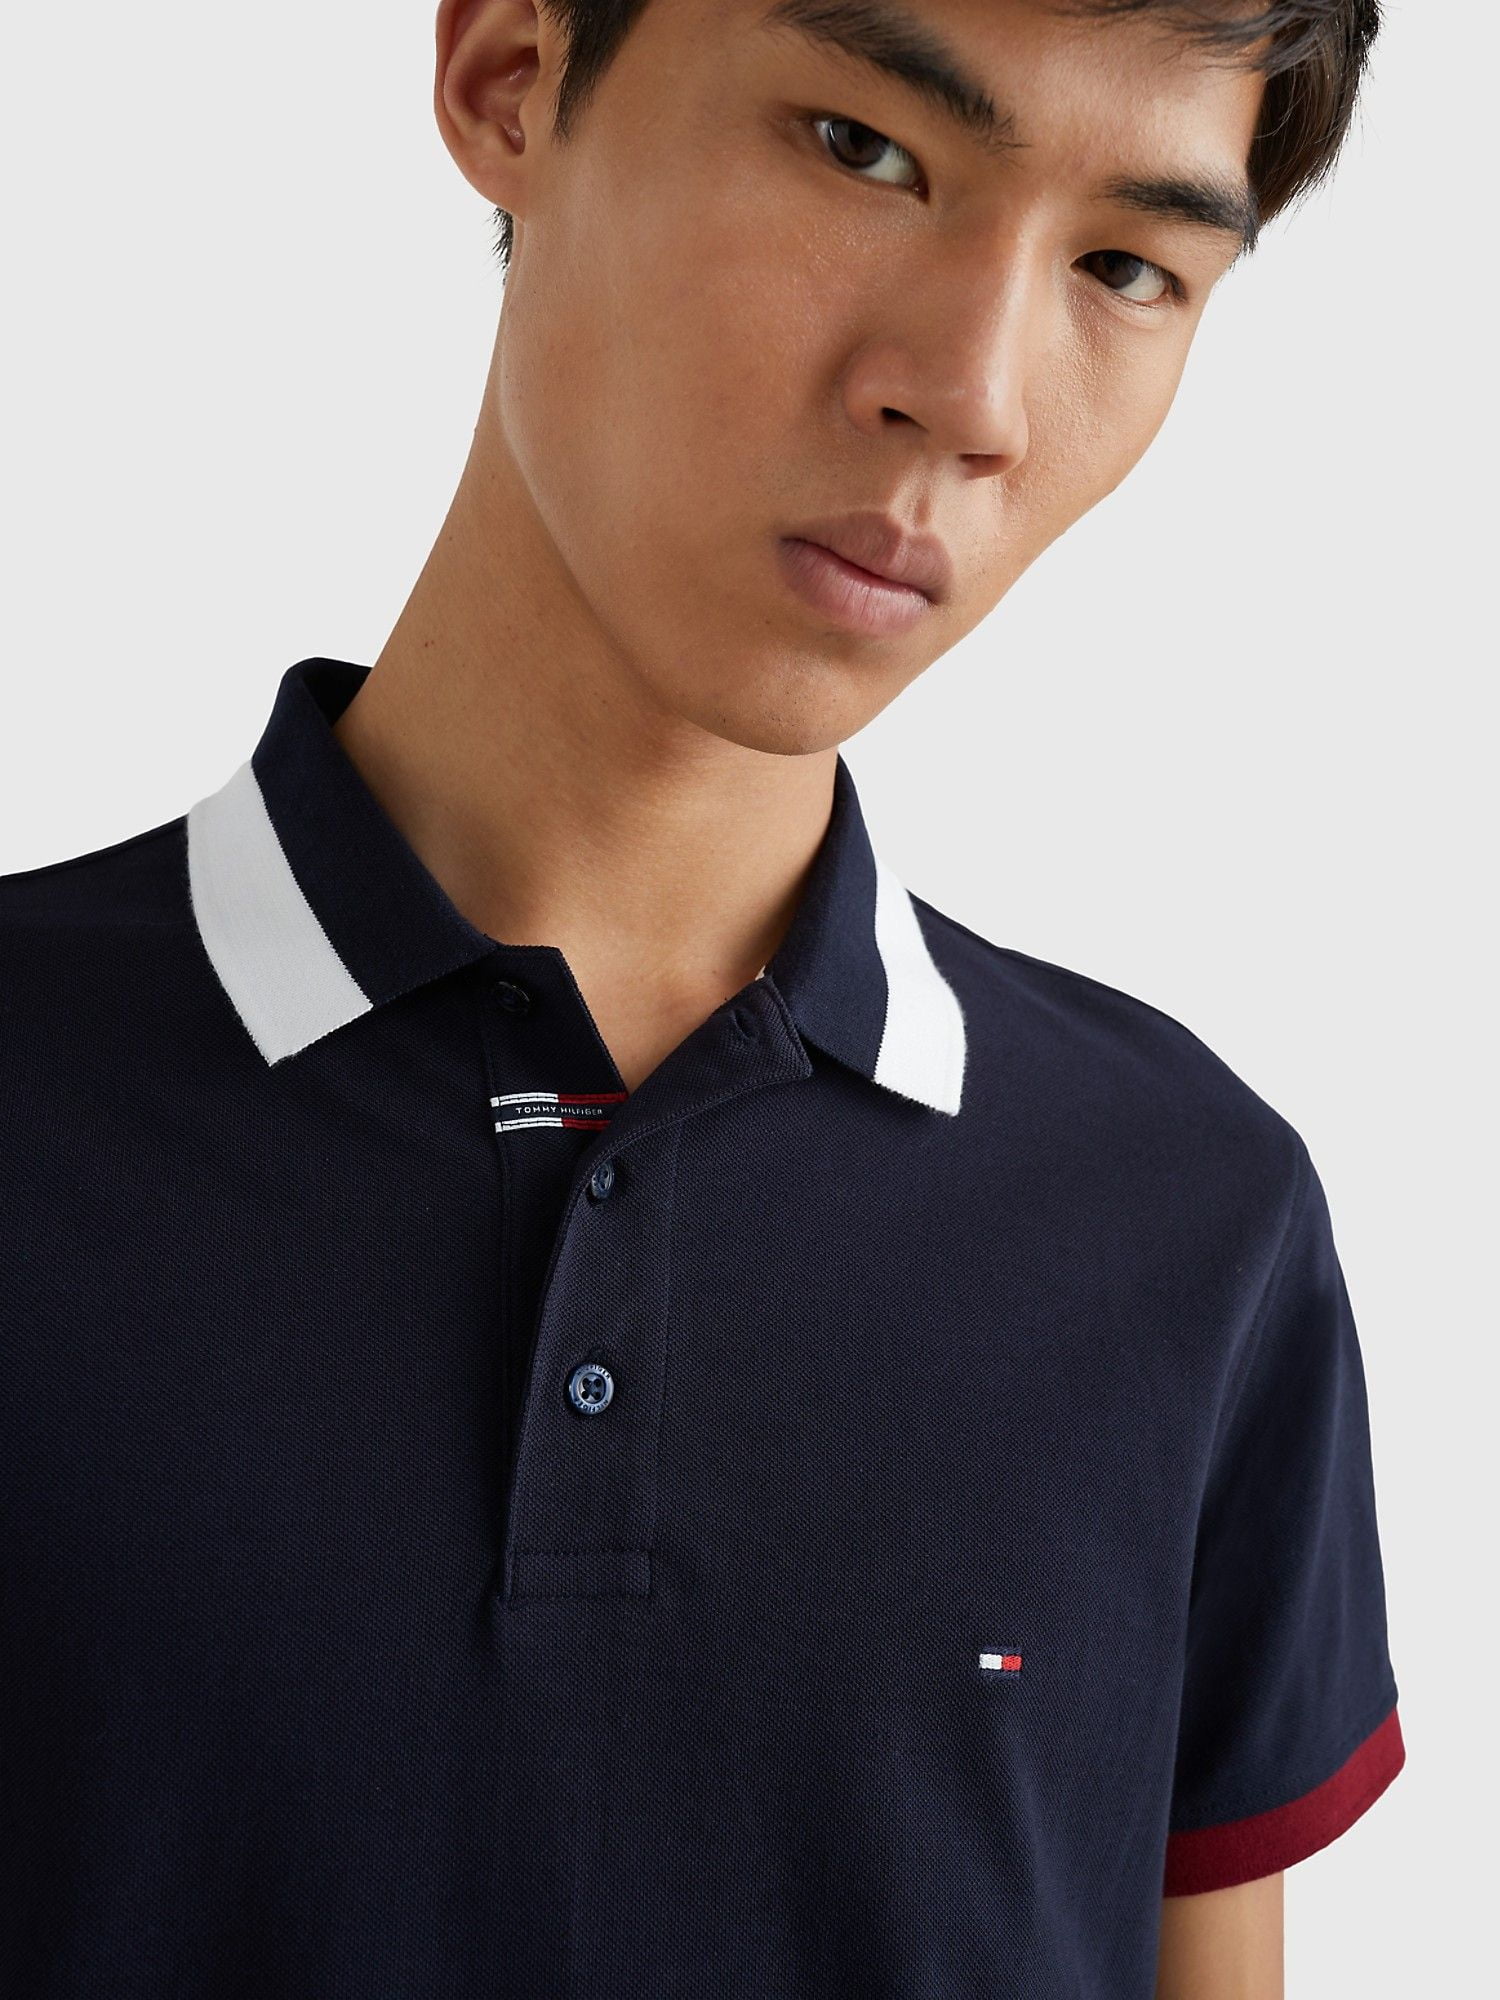 POLO NAM SLIM FIT TIPPED TOMMY HILFIGER - DESERT SKY